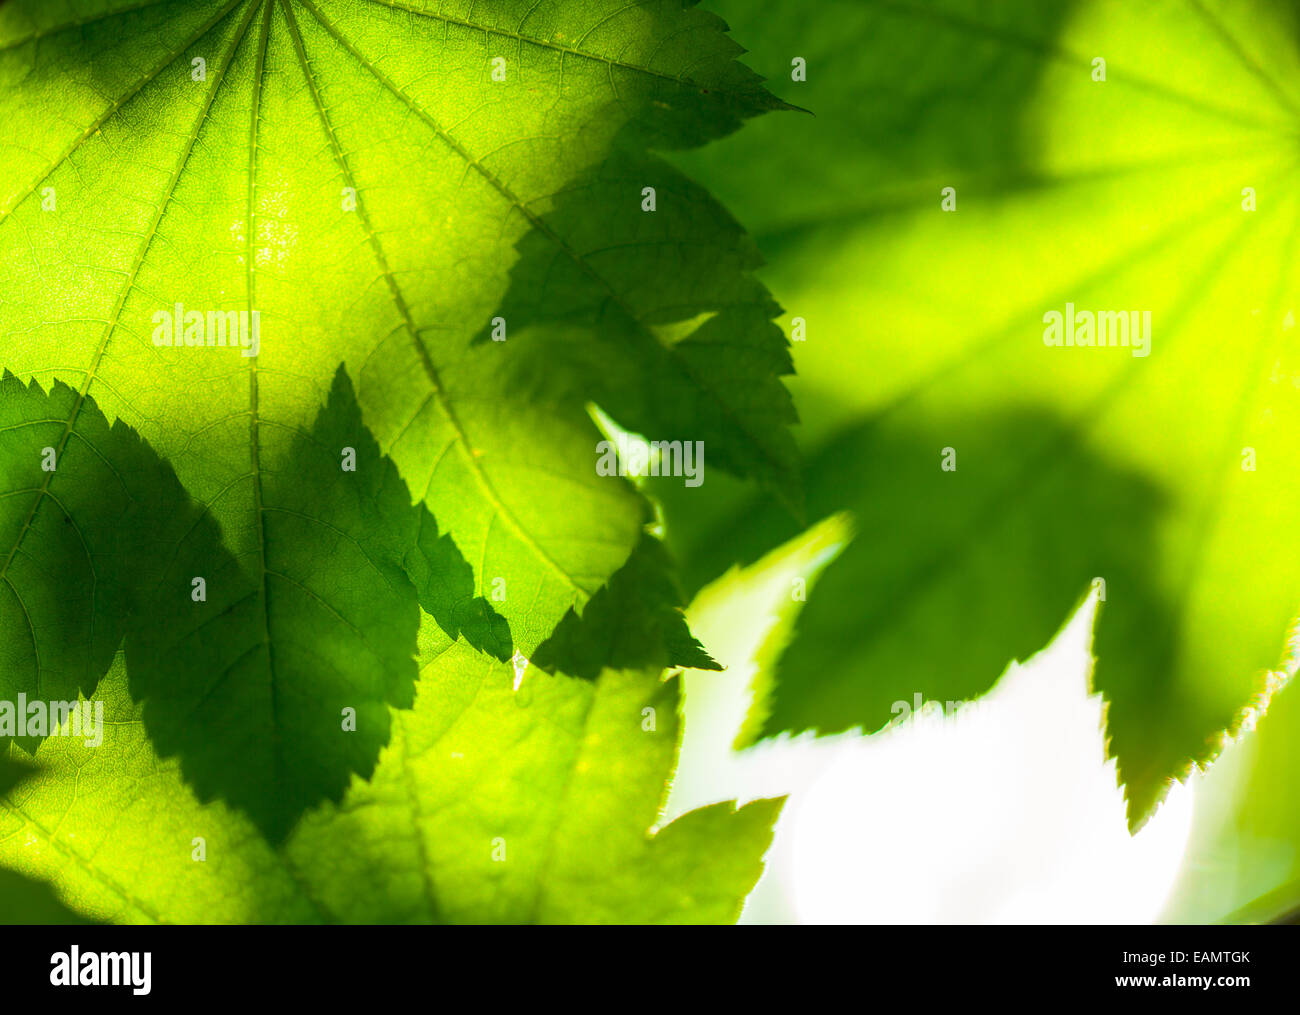 Abstract maple leaves background, shallow depth of focus Stock Photo